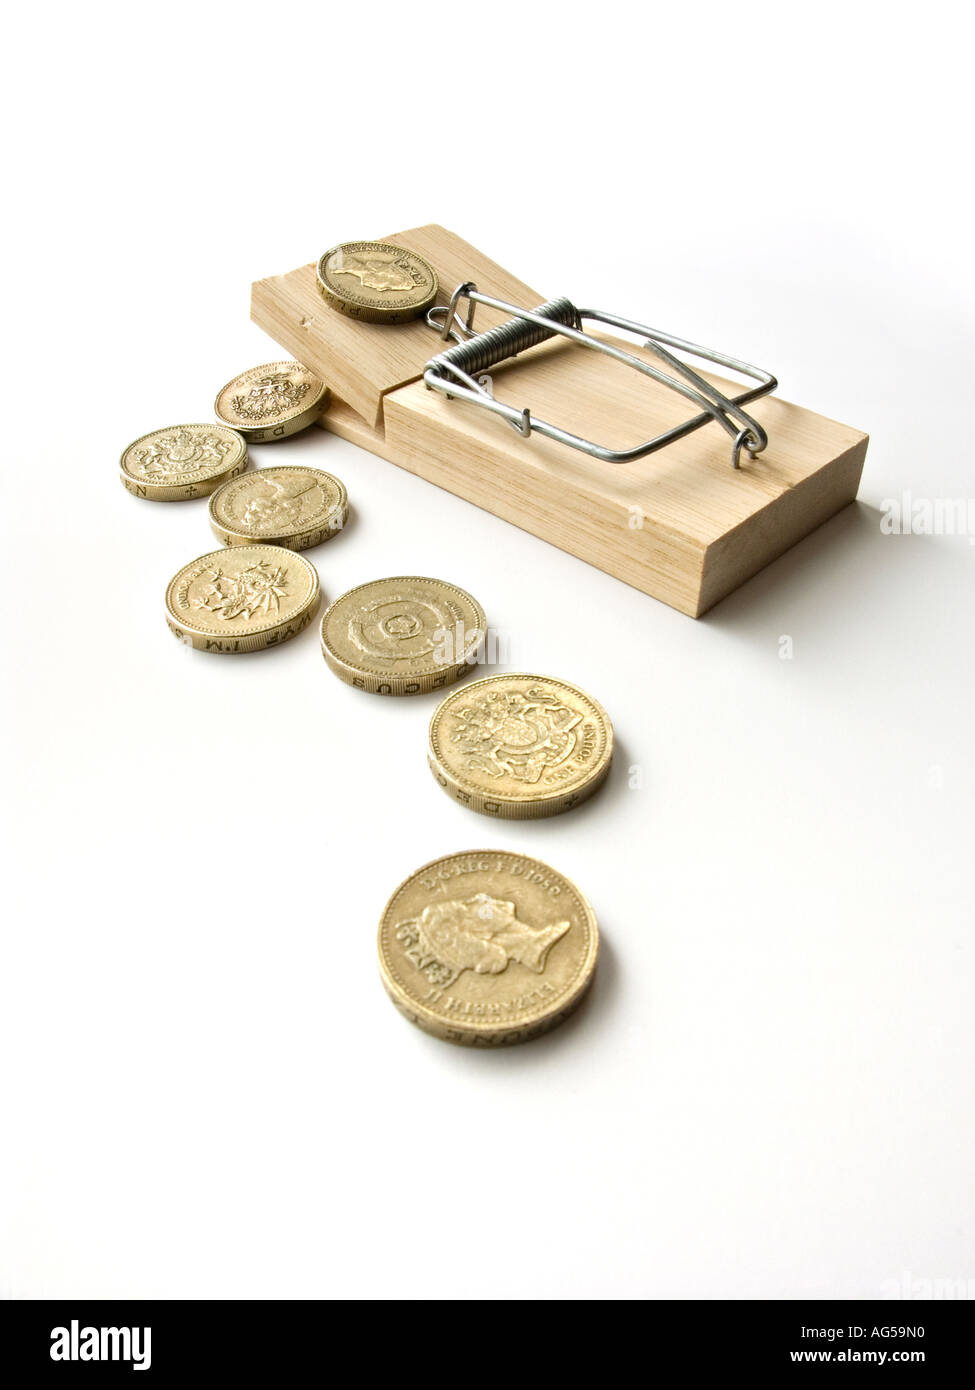 Mousetrap baited with money Stock Photo